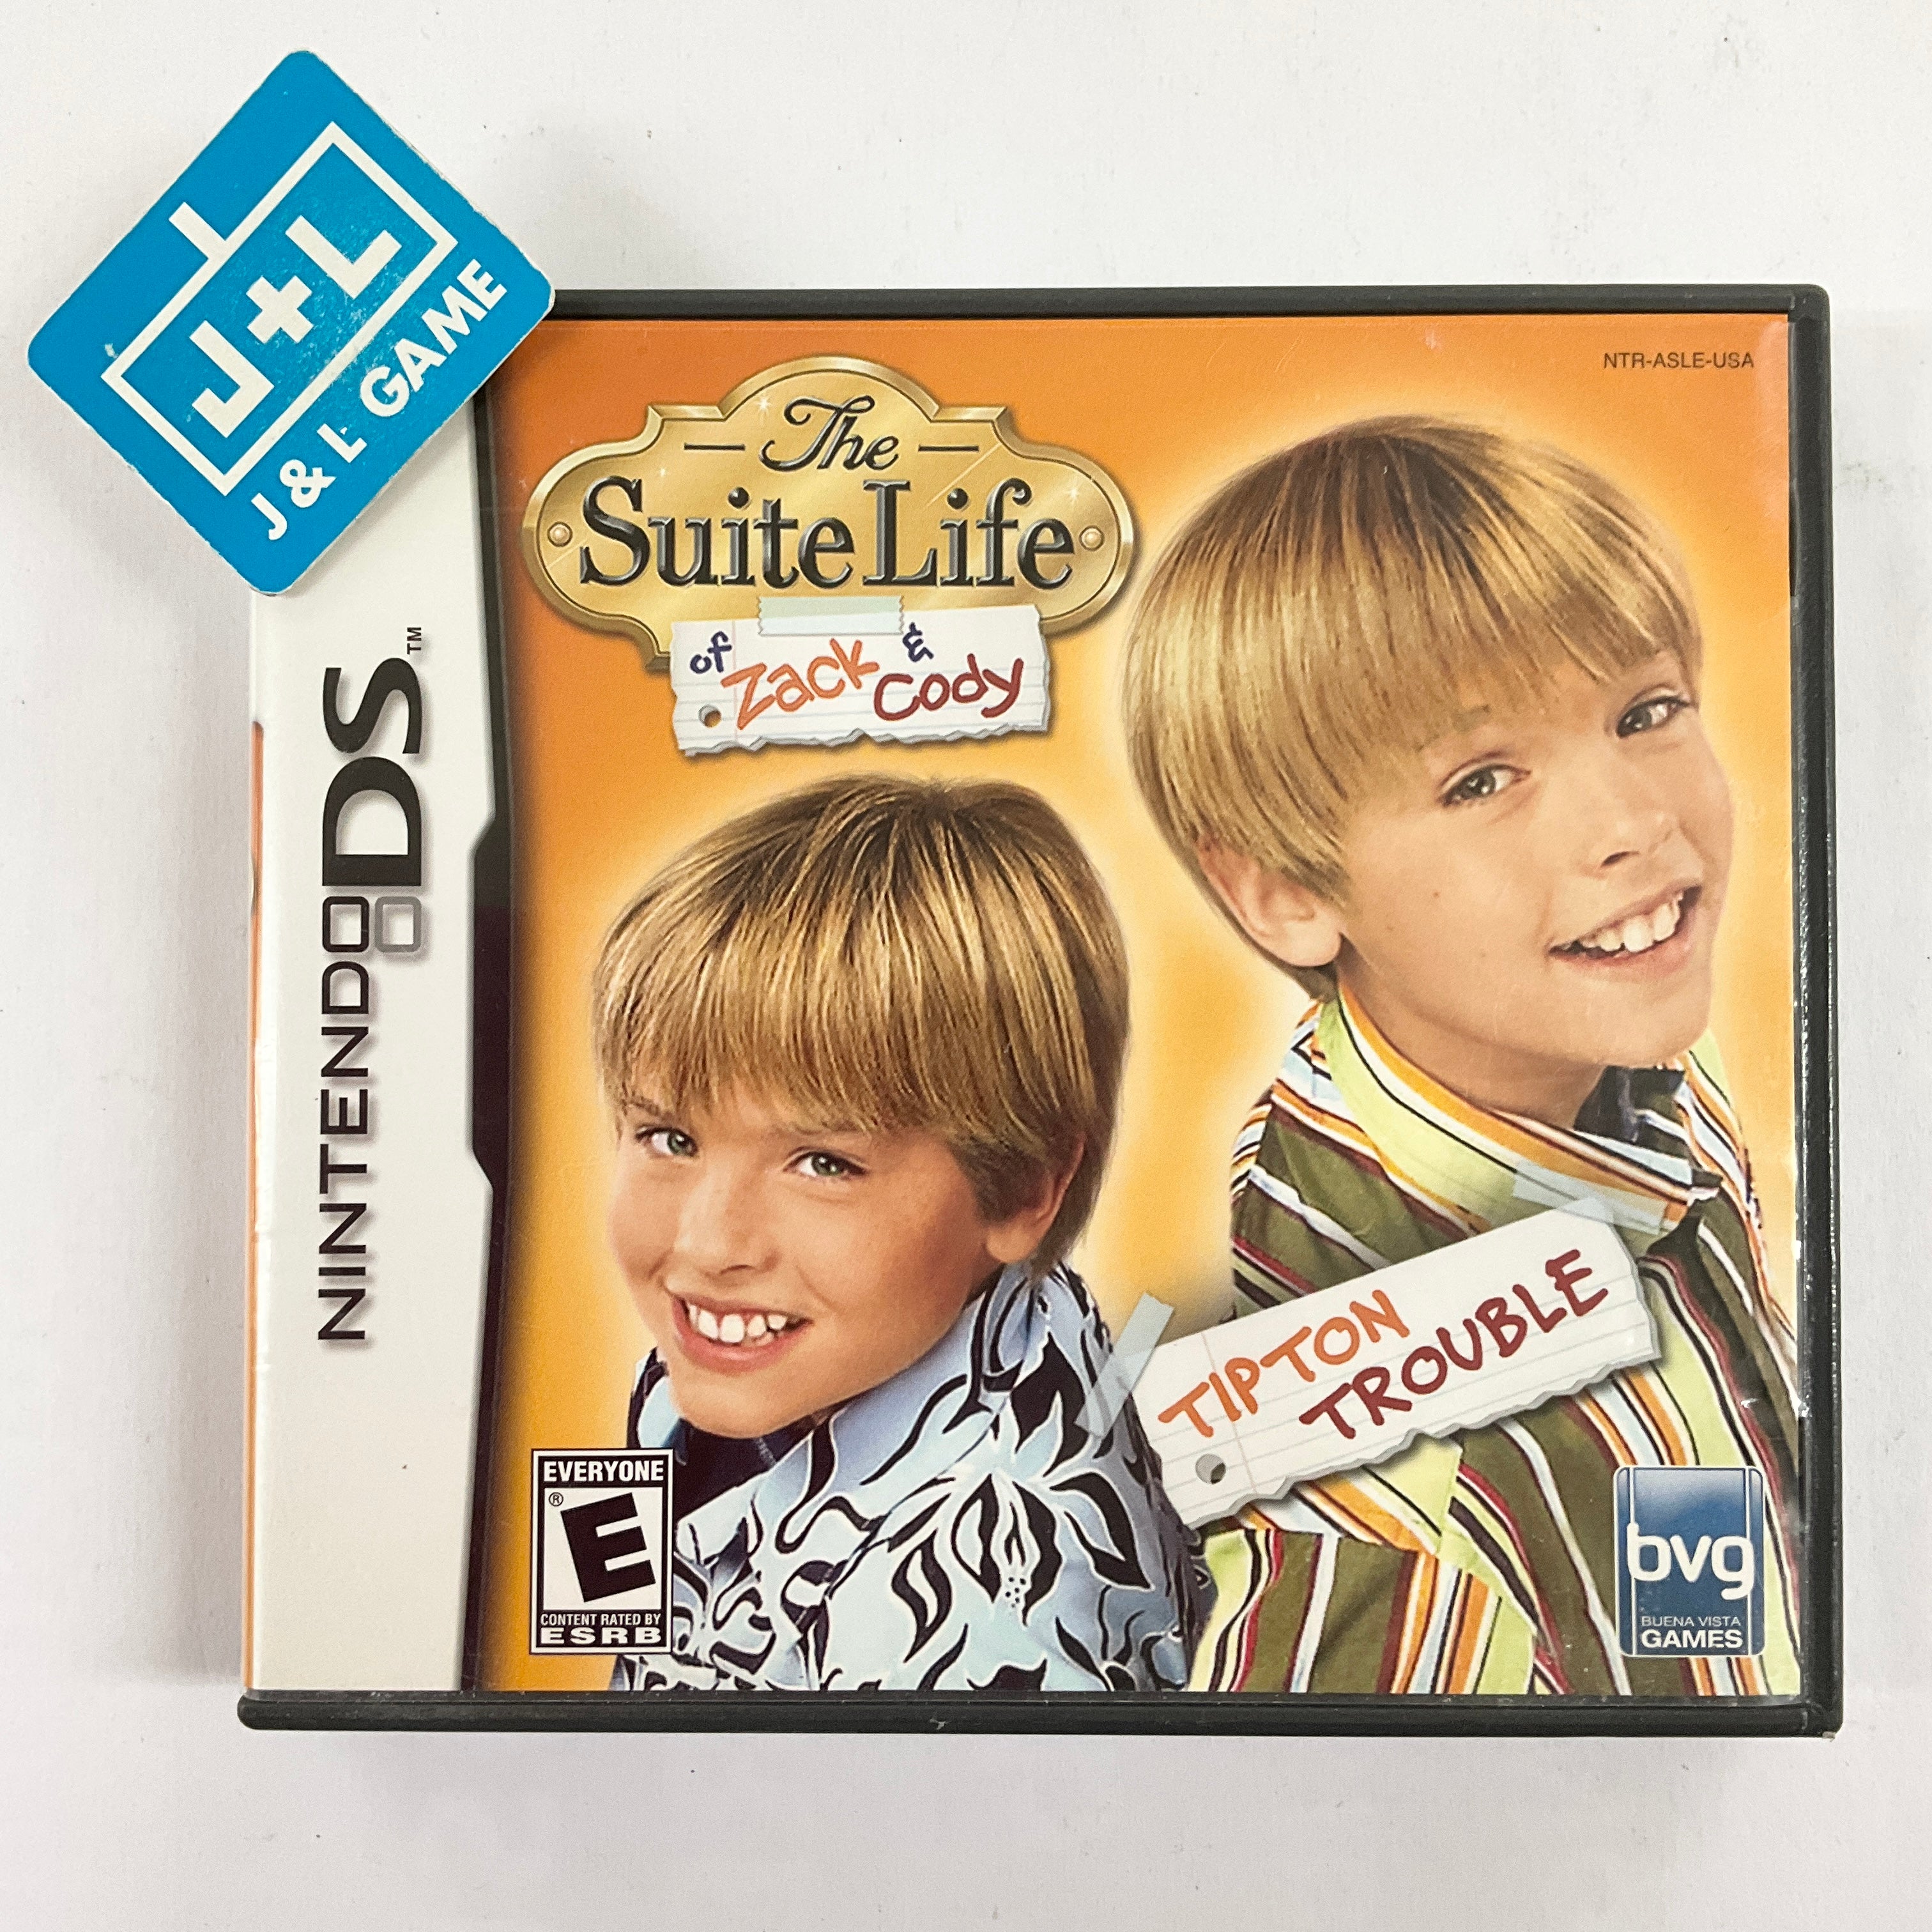 The Suite Life of Zack & Cody: Tipton Trouble - (NDS) Nintendo DS [Pre-Owned] Video Games Buena Vista Games   